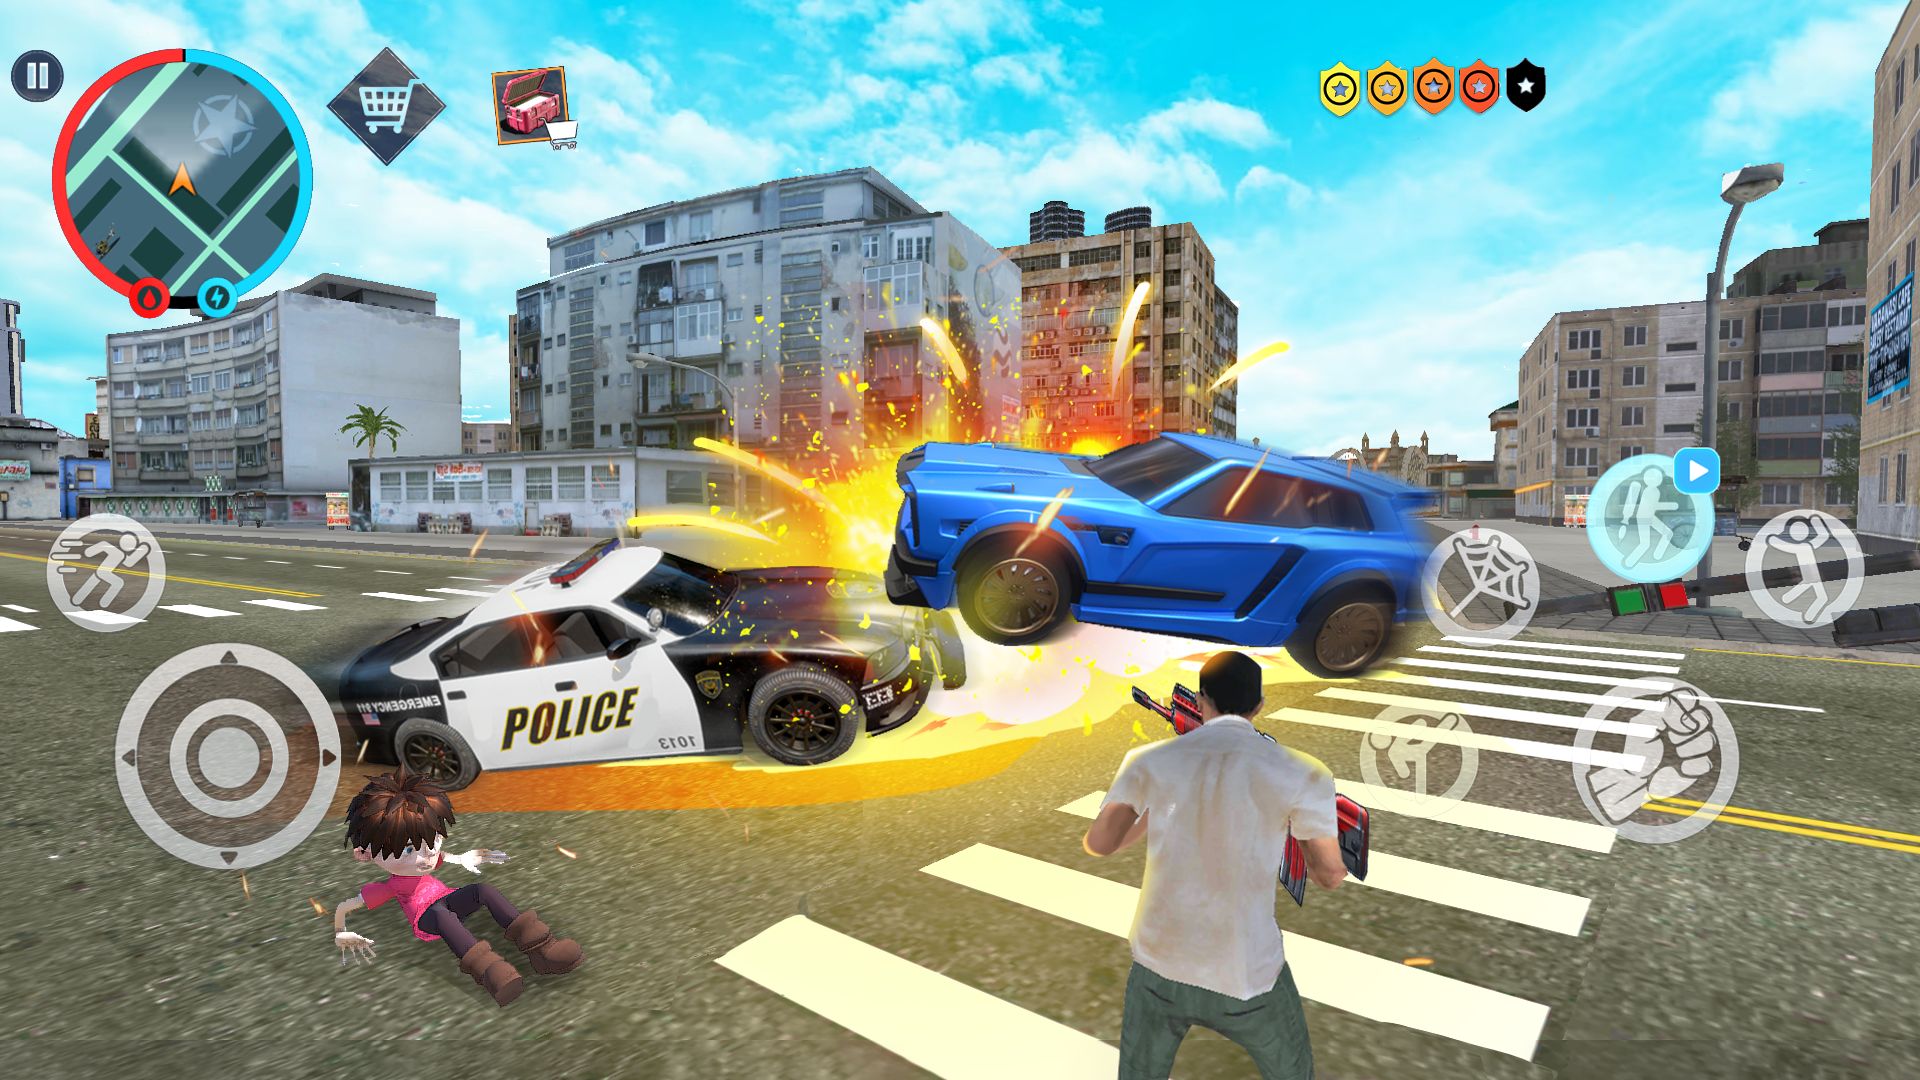 Full version of Android apk app Gangster party: Gangland war for tablet and phone.